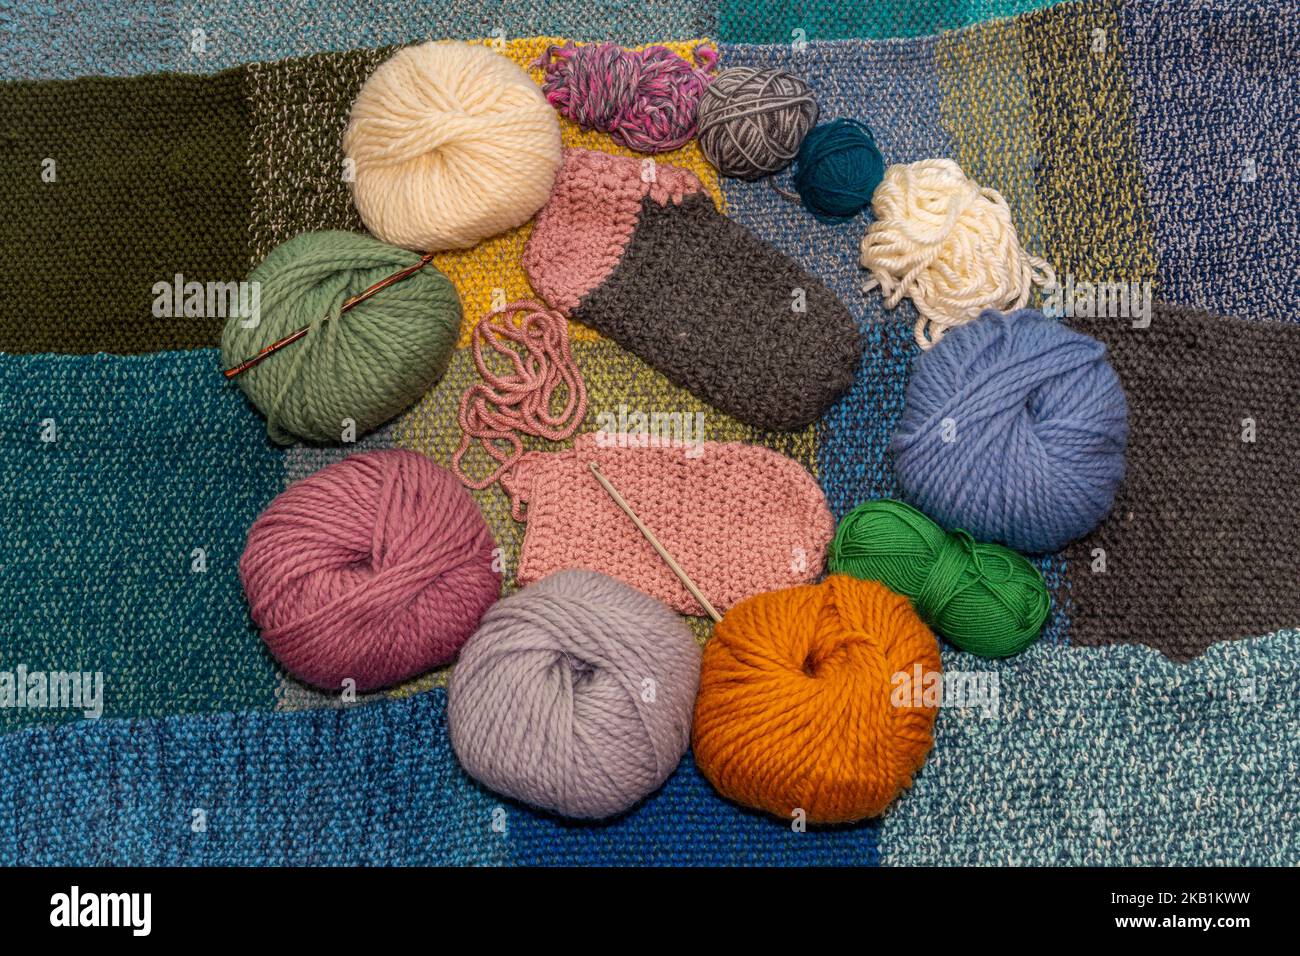 Variety of balls of wool for crochet and knitting on a warm, knitted background with woolen slippers in the making in the middle Stock Photo